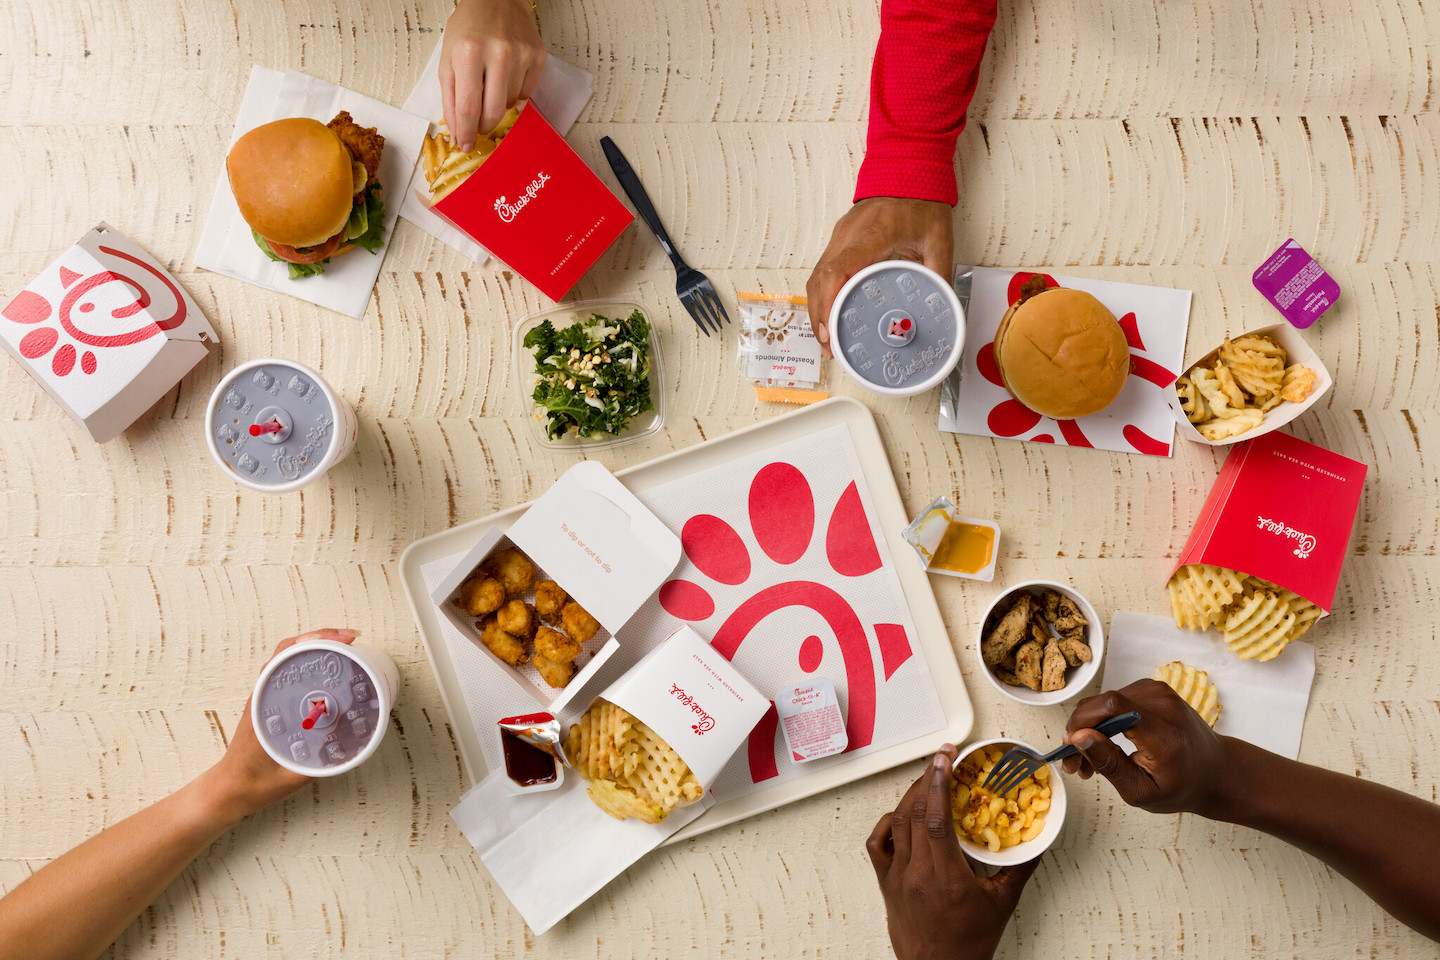 A spread of Chick-fil-A food, including Waffle Fries, beverages, Grilled Nuggets, Mac & Cheese, Nuggets and the original Chick-fil-A Chicken Sandwich.